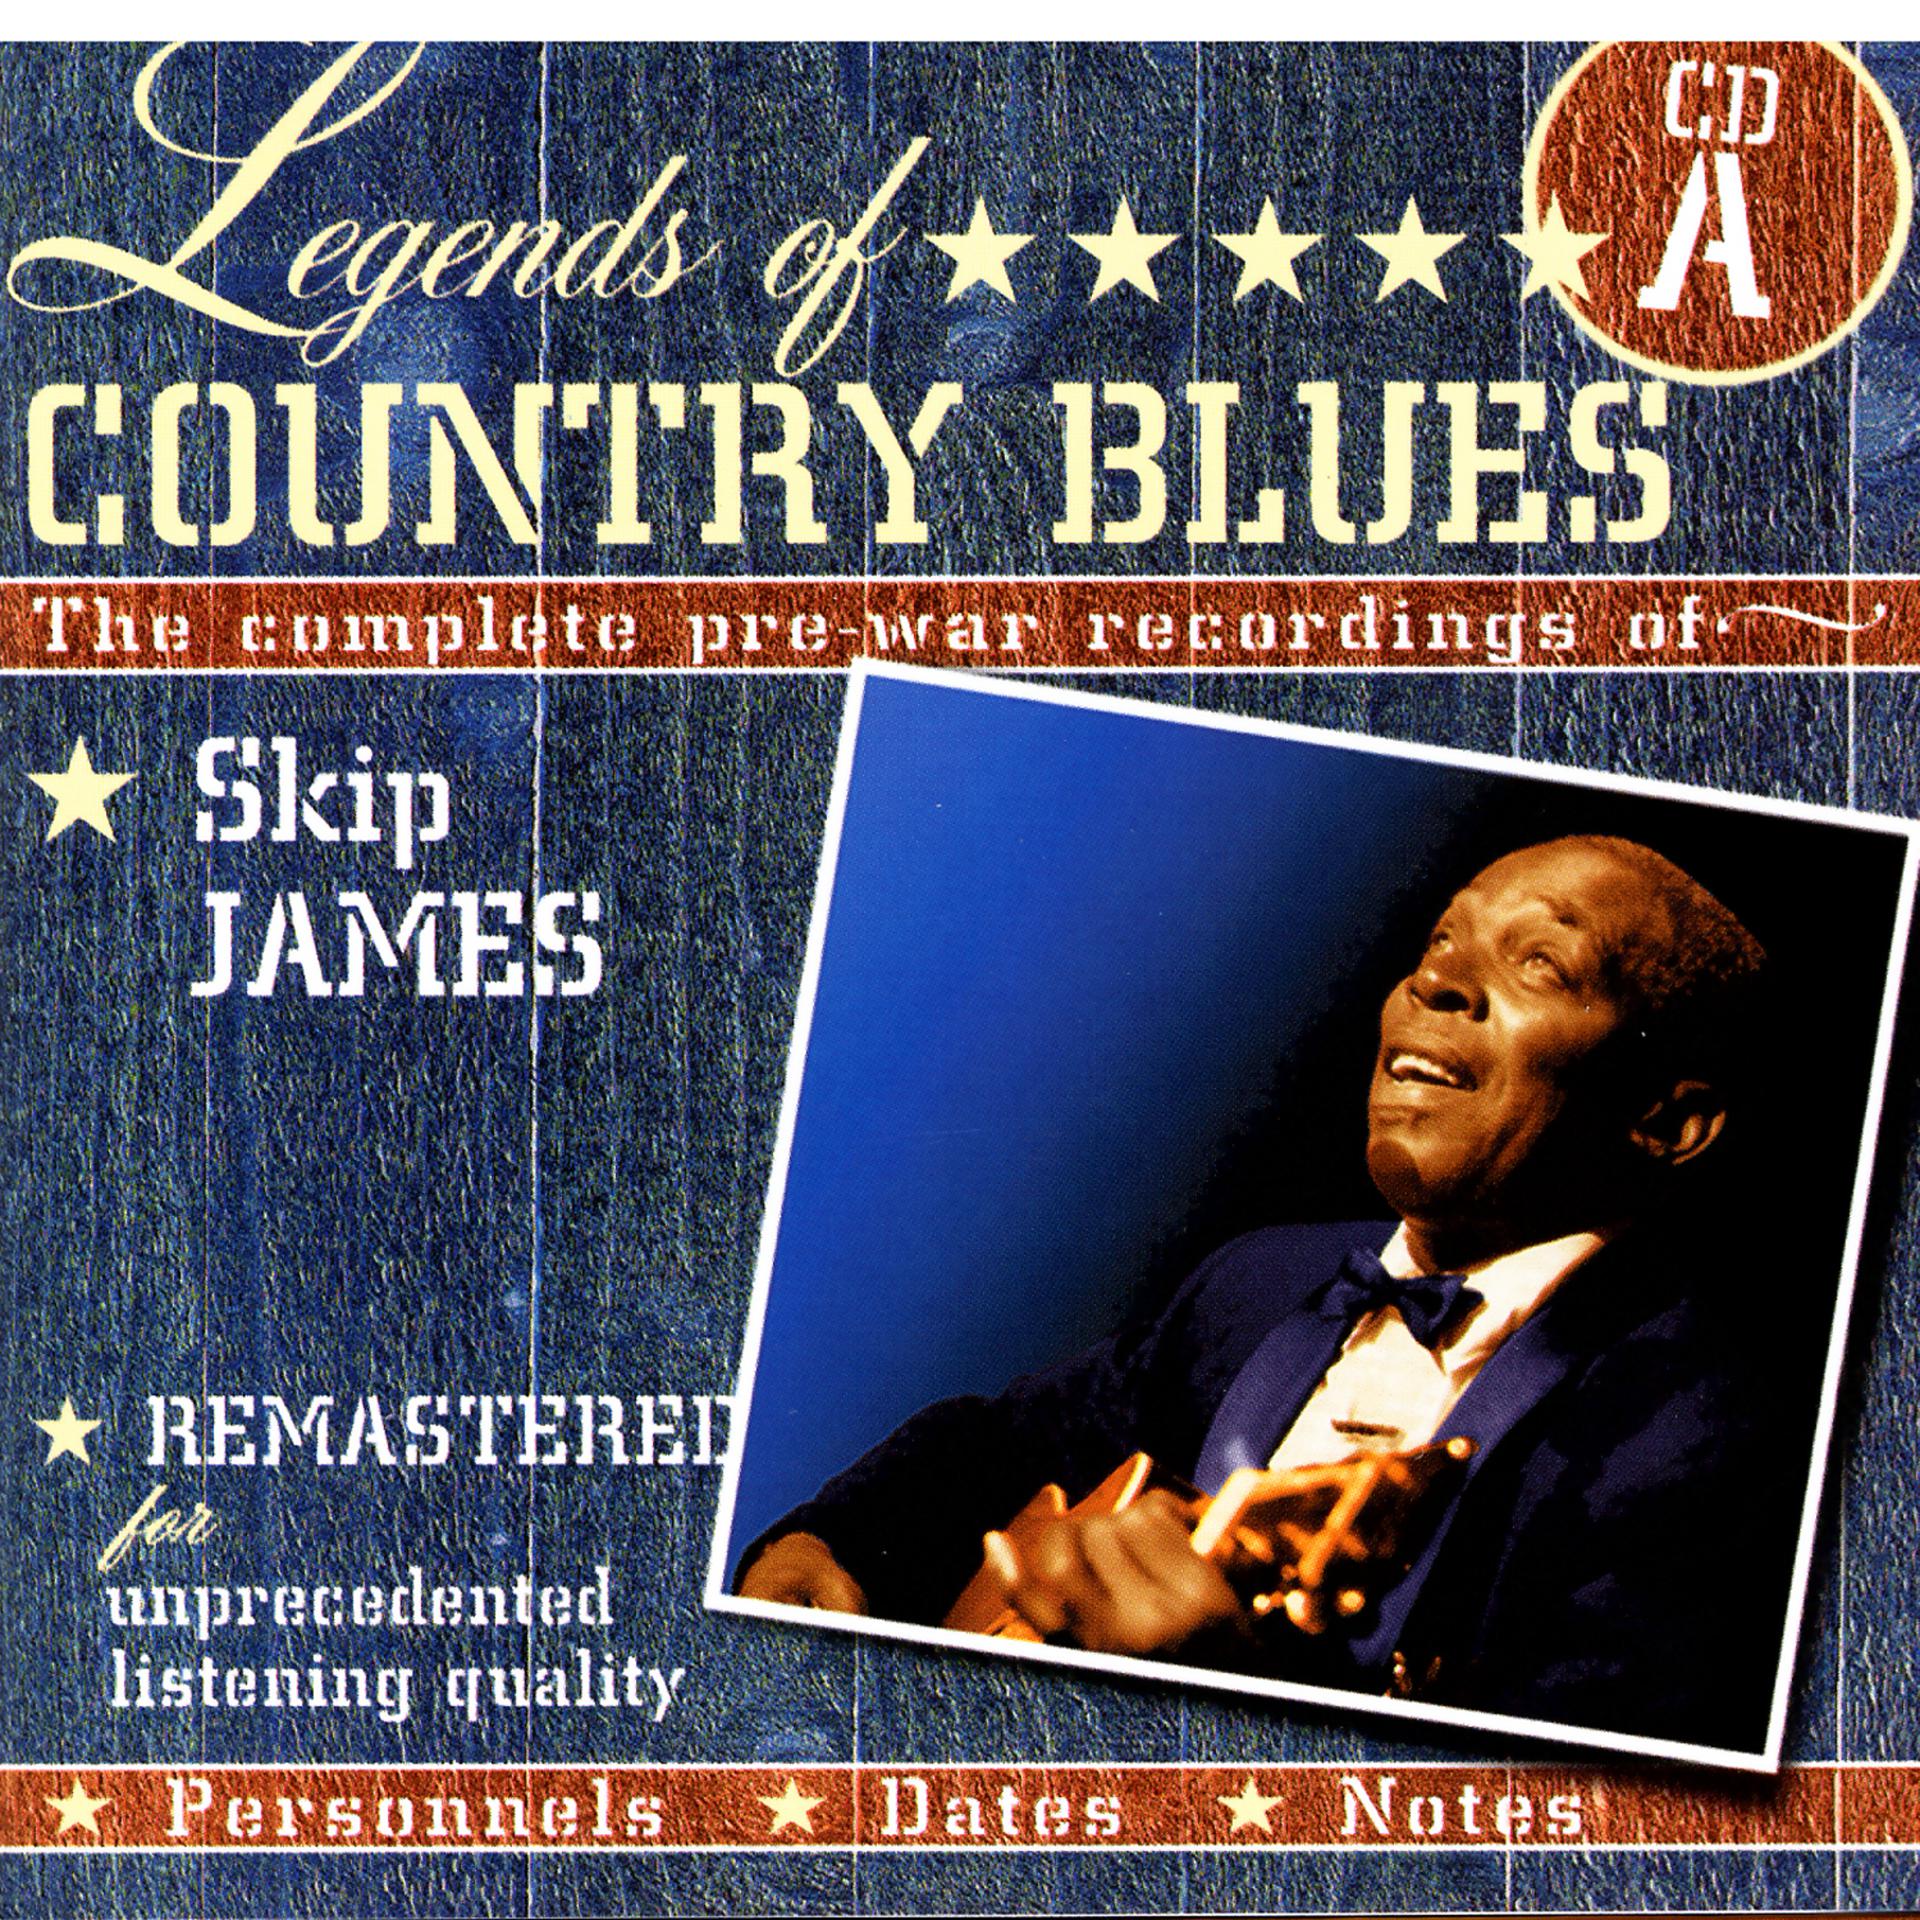 Постер альбома Legends Of Country Blues: The Complete Pre-War Recordings Of Skip James (Disc A)